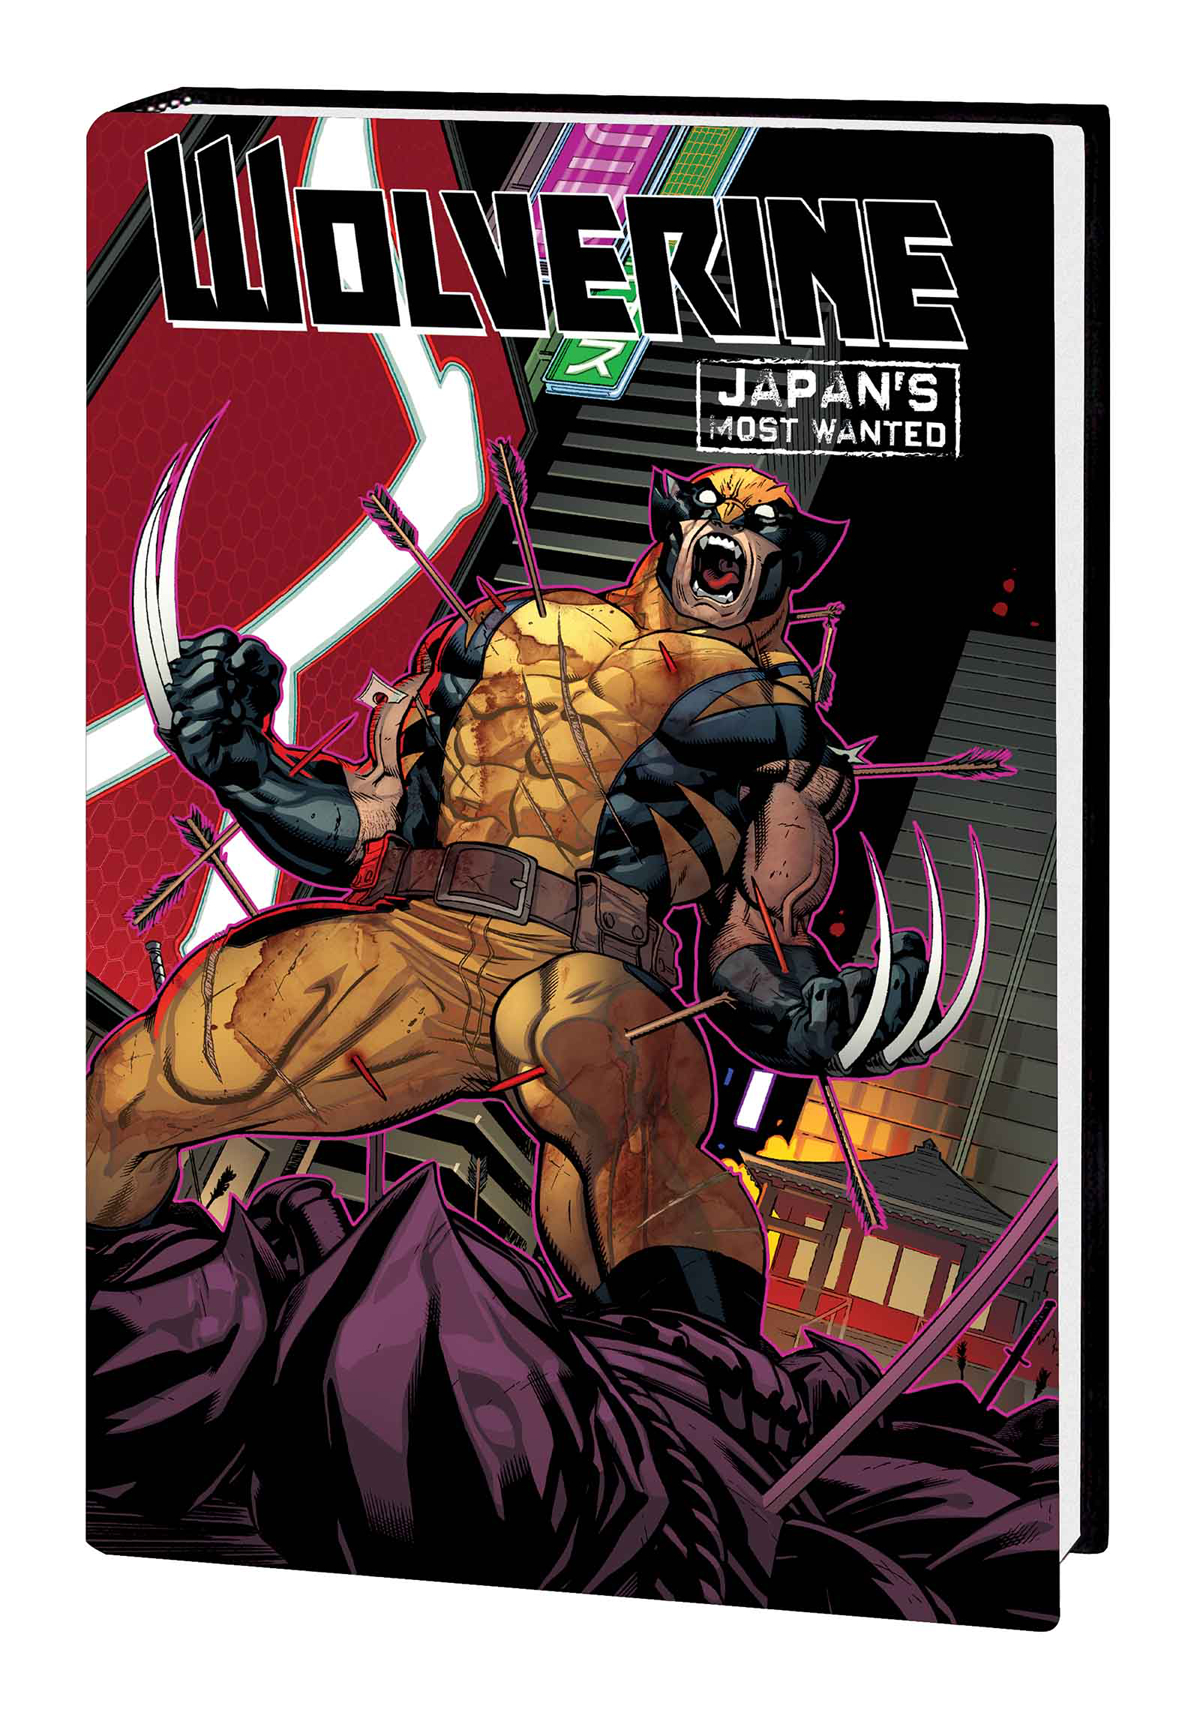 Wolverine: Japan's Most Wanted #7